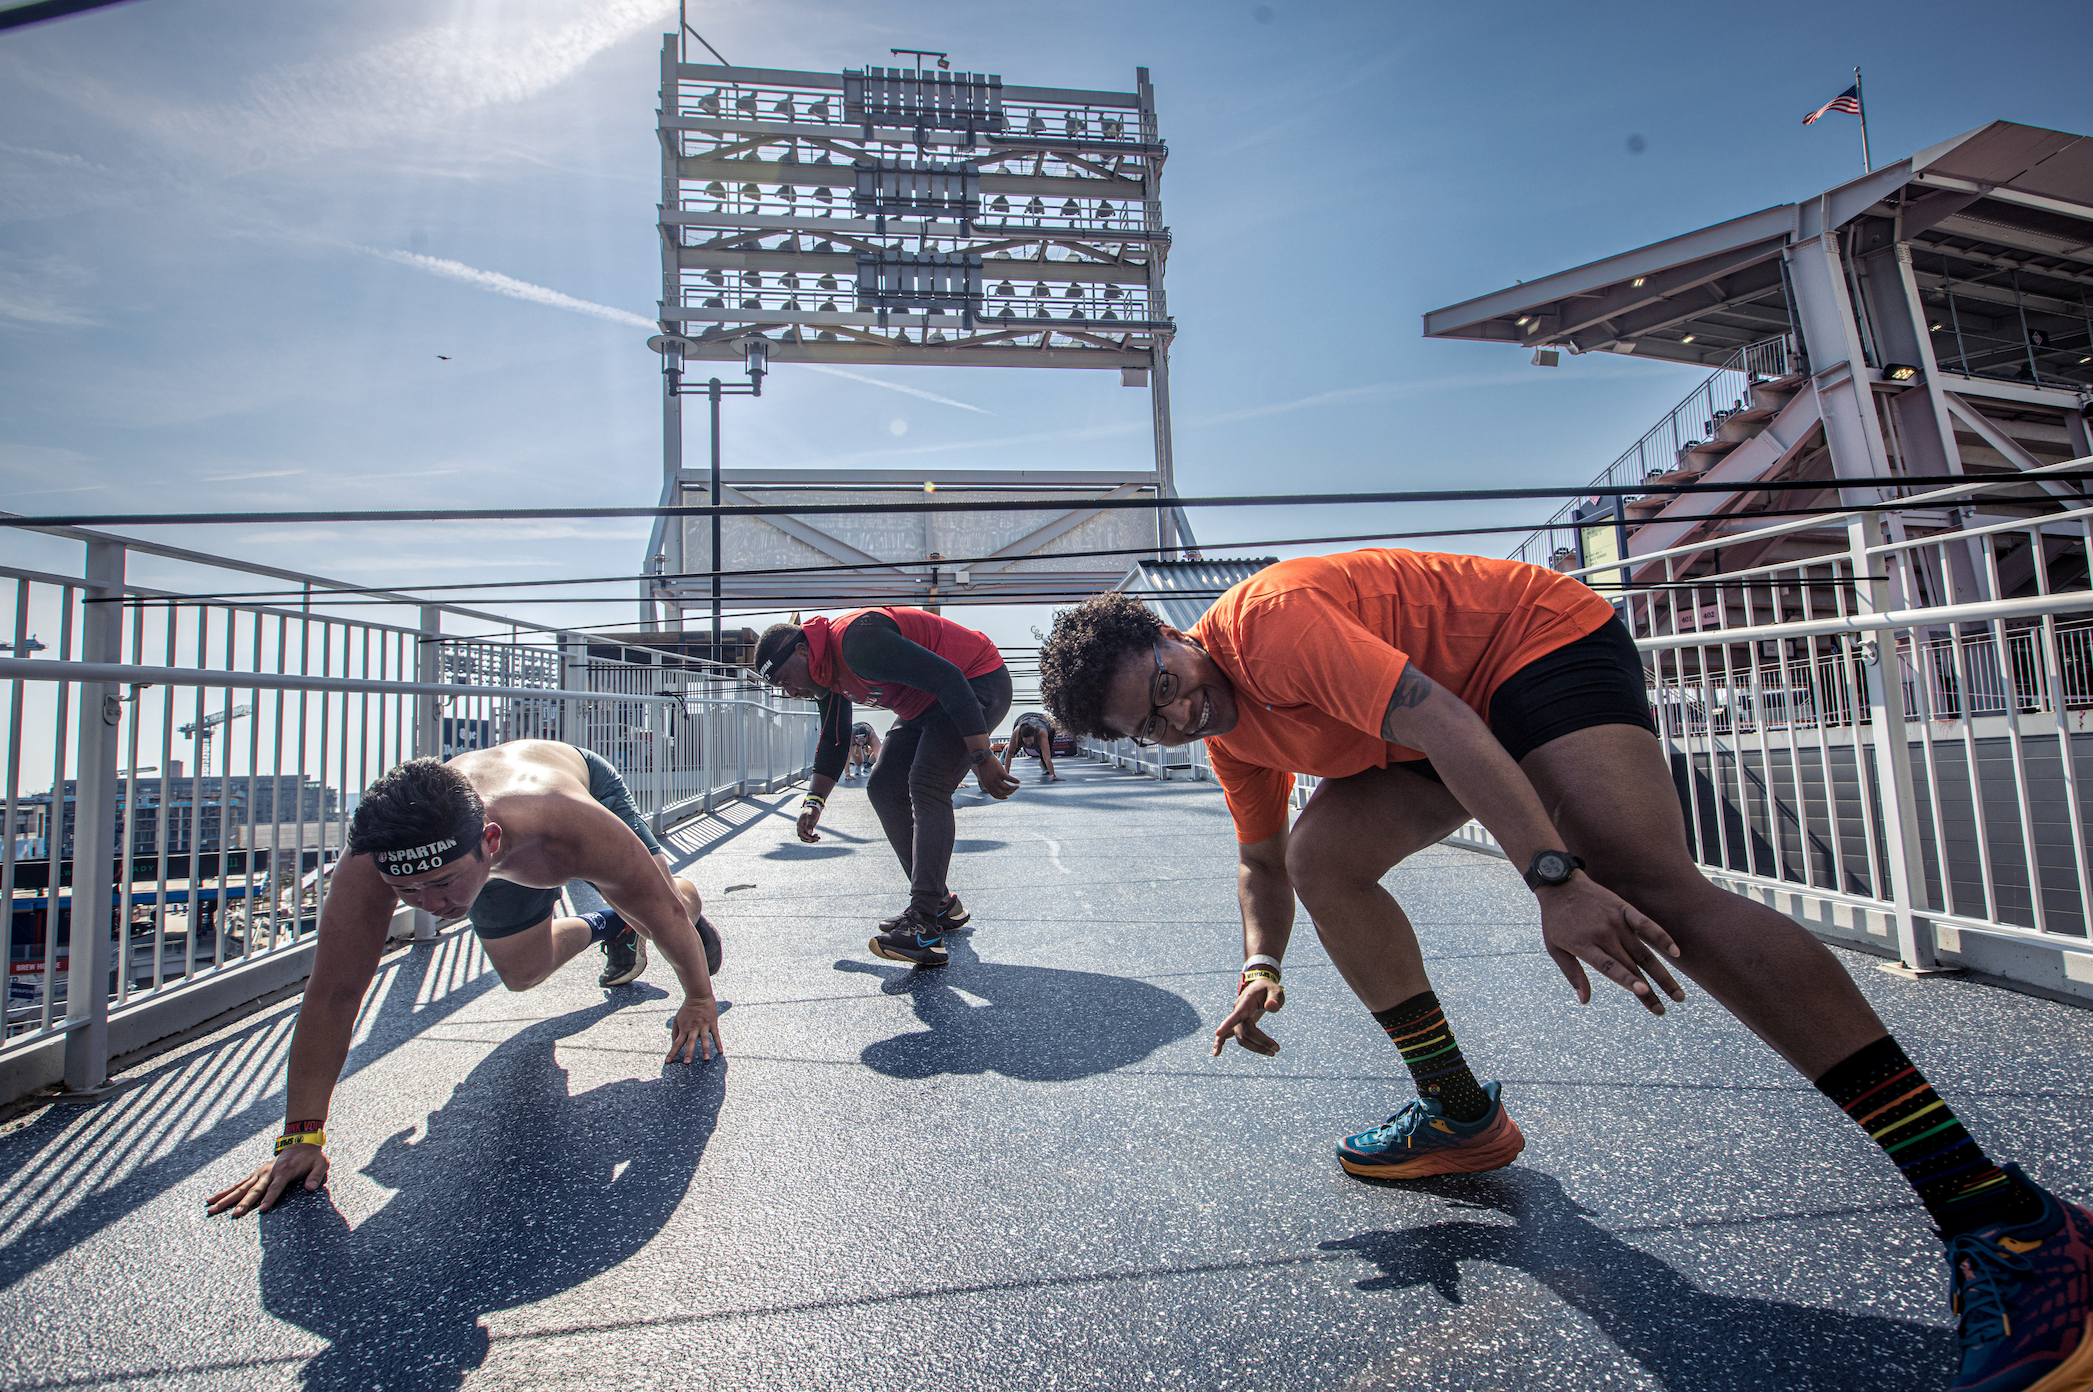 a spartan racer completing the cord crawl obstacle at a stadion race